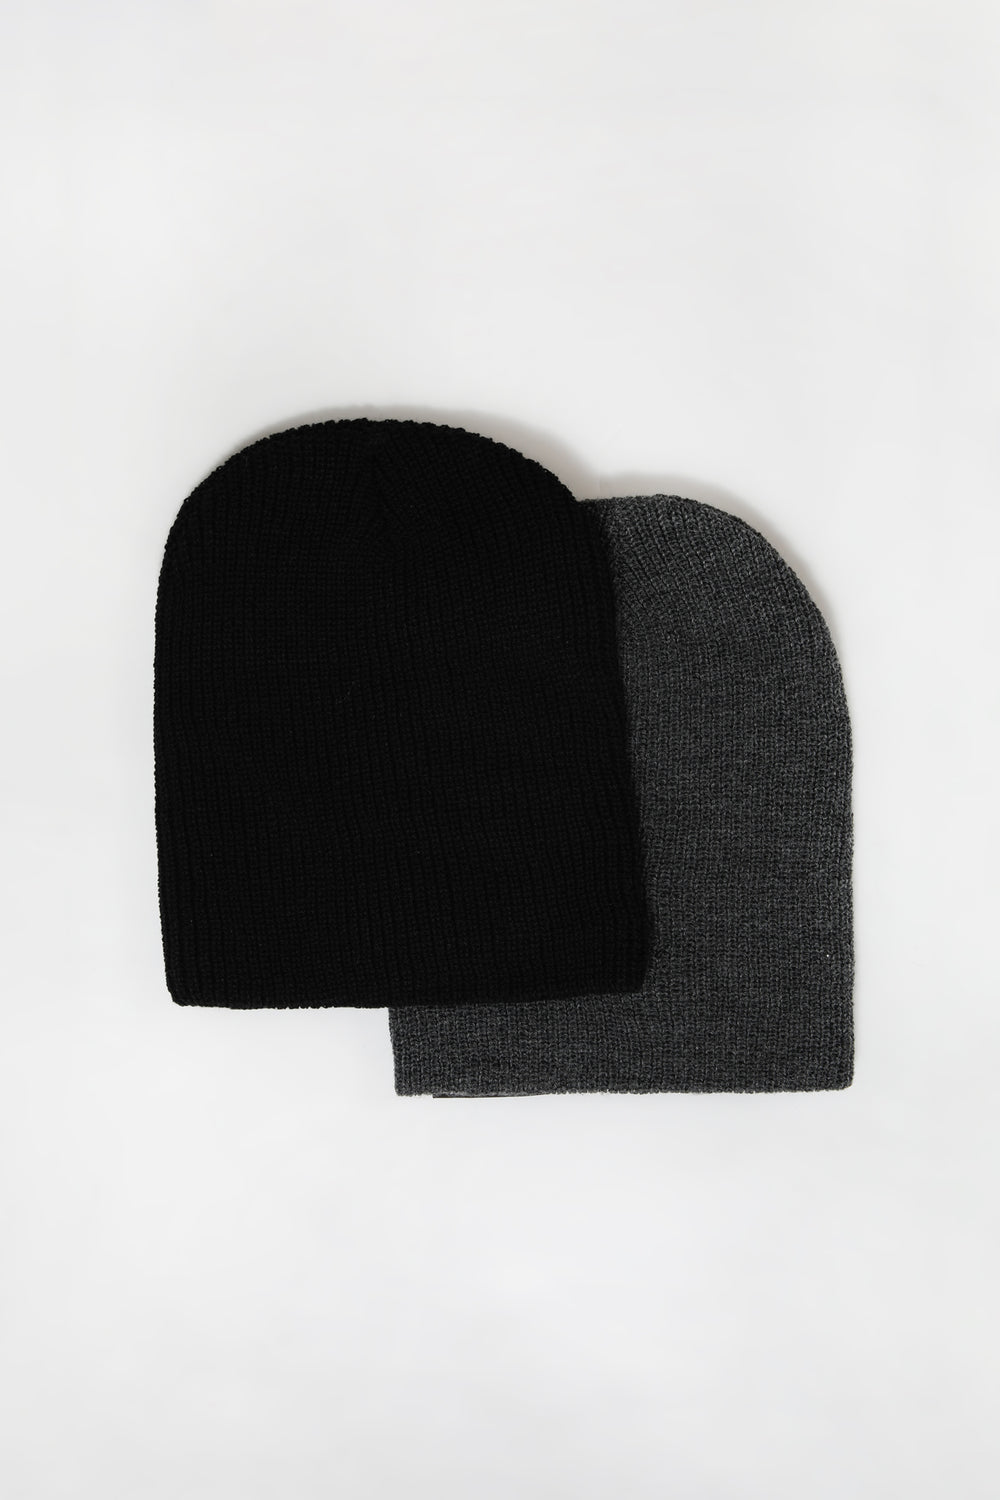 Zoo York Youth Slouch Beanie 2-Pack Charcoal